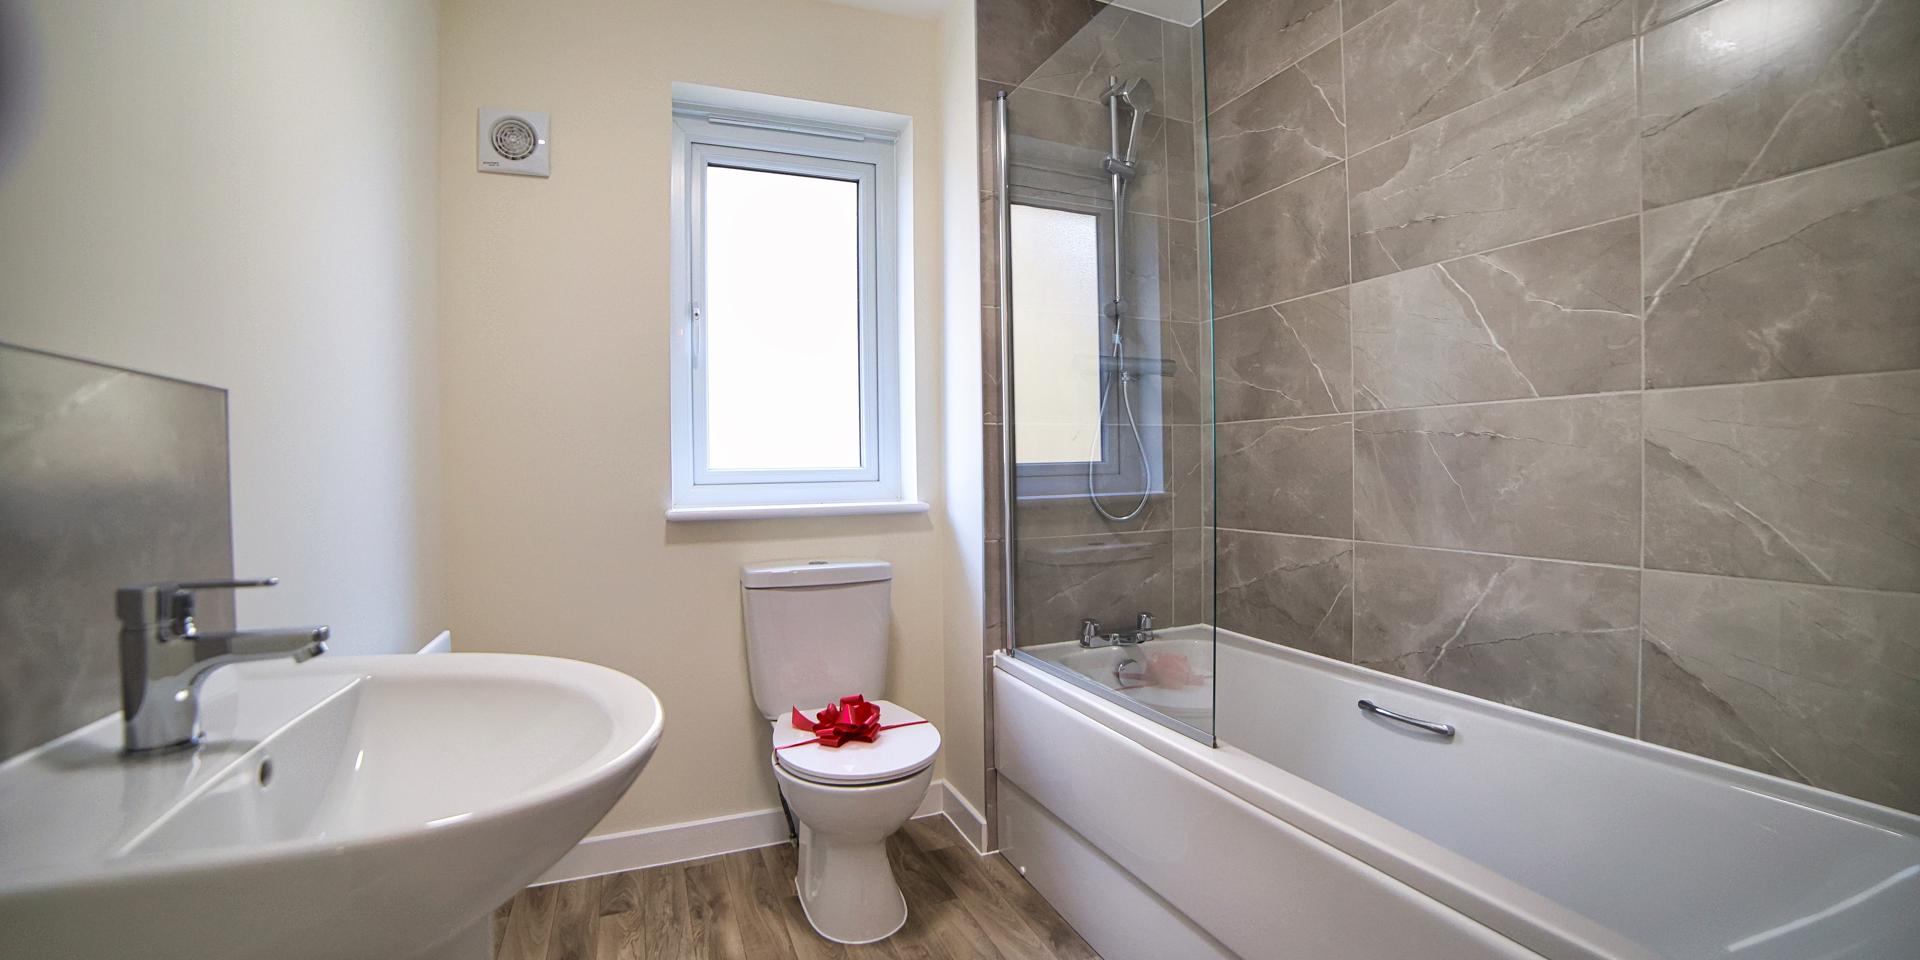 A view of the bathroom with its white suite, shower over the bath, wash hand basin and heated towel rail